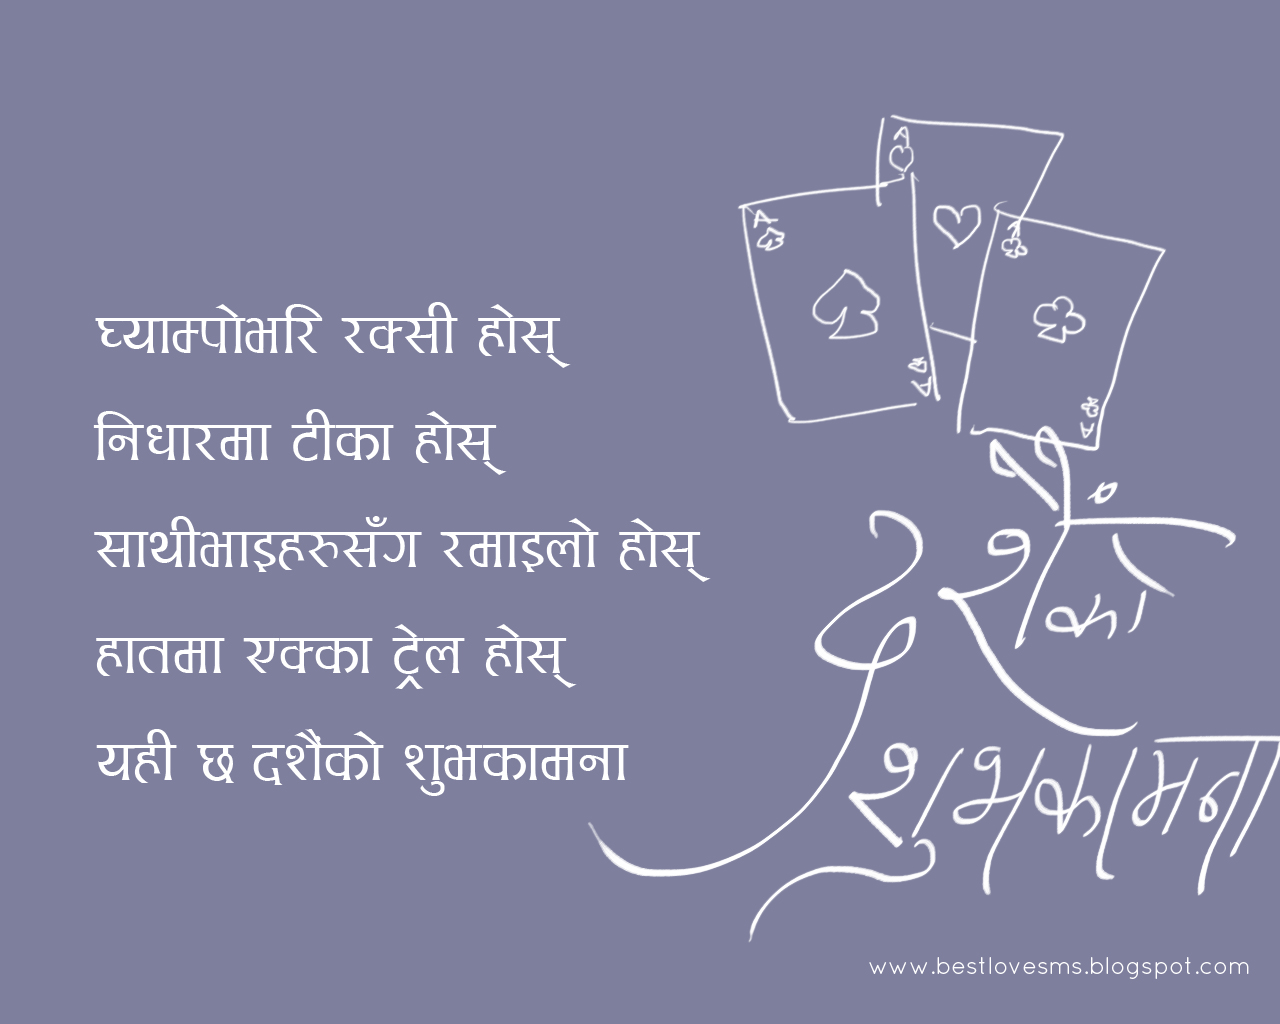 Best Love Messages: Dashain SMS wallpapers messages